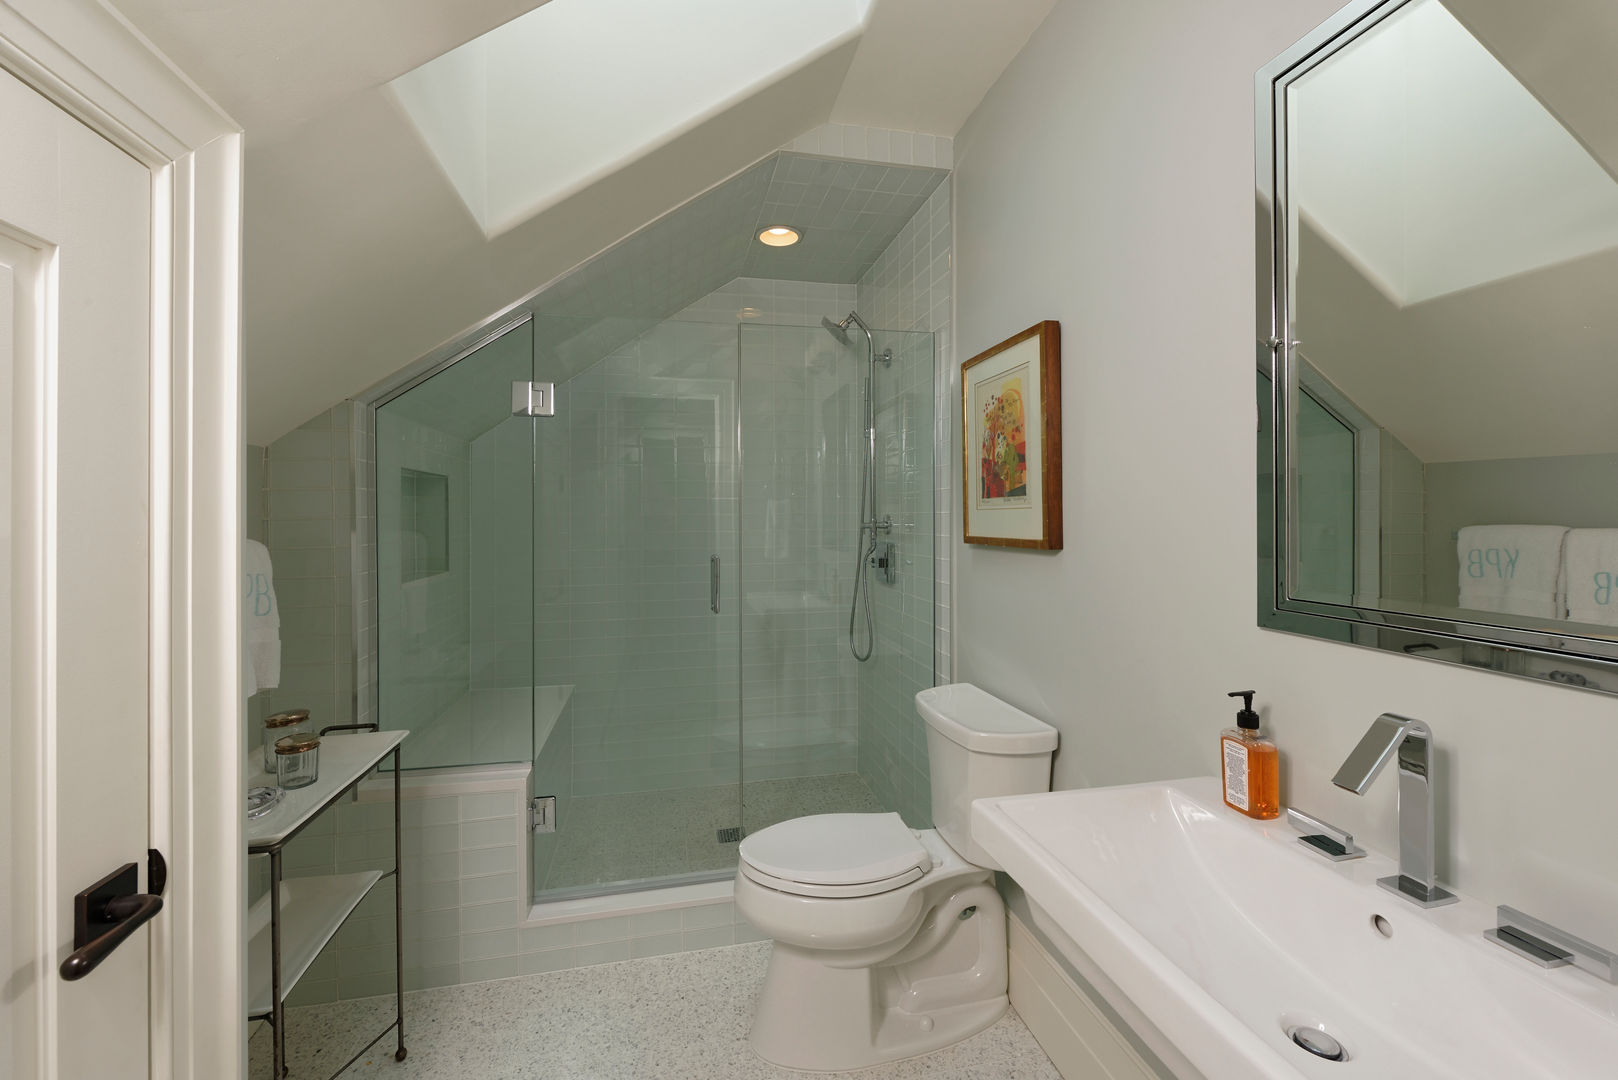 Fire Restoration in Chevy Chase Creates Opportunity for Whole House Renovation BOWA - Design Build Experts Modern bathroom